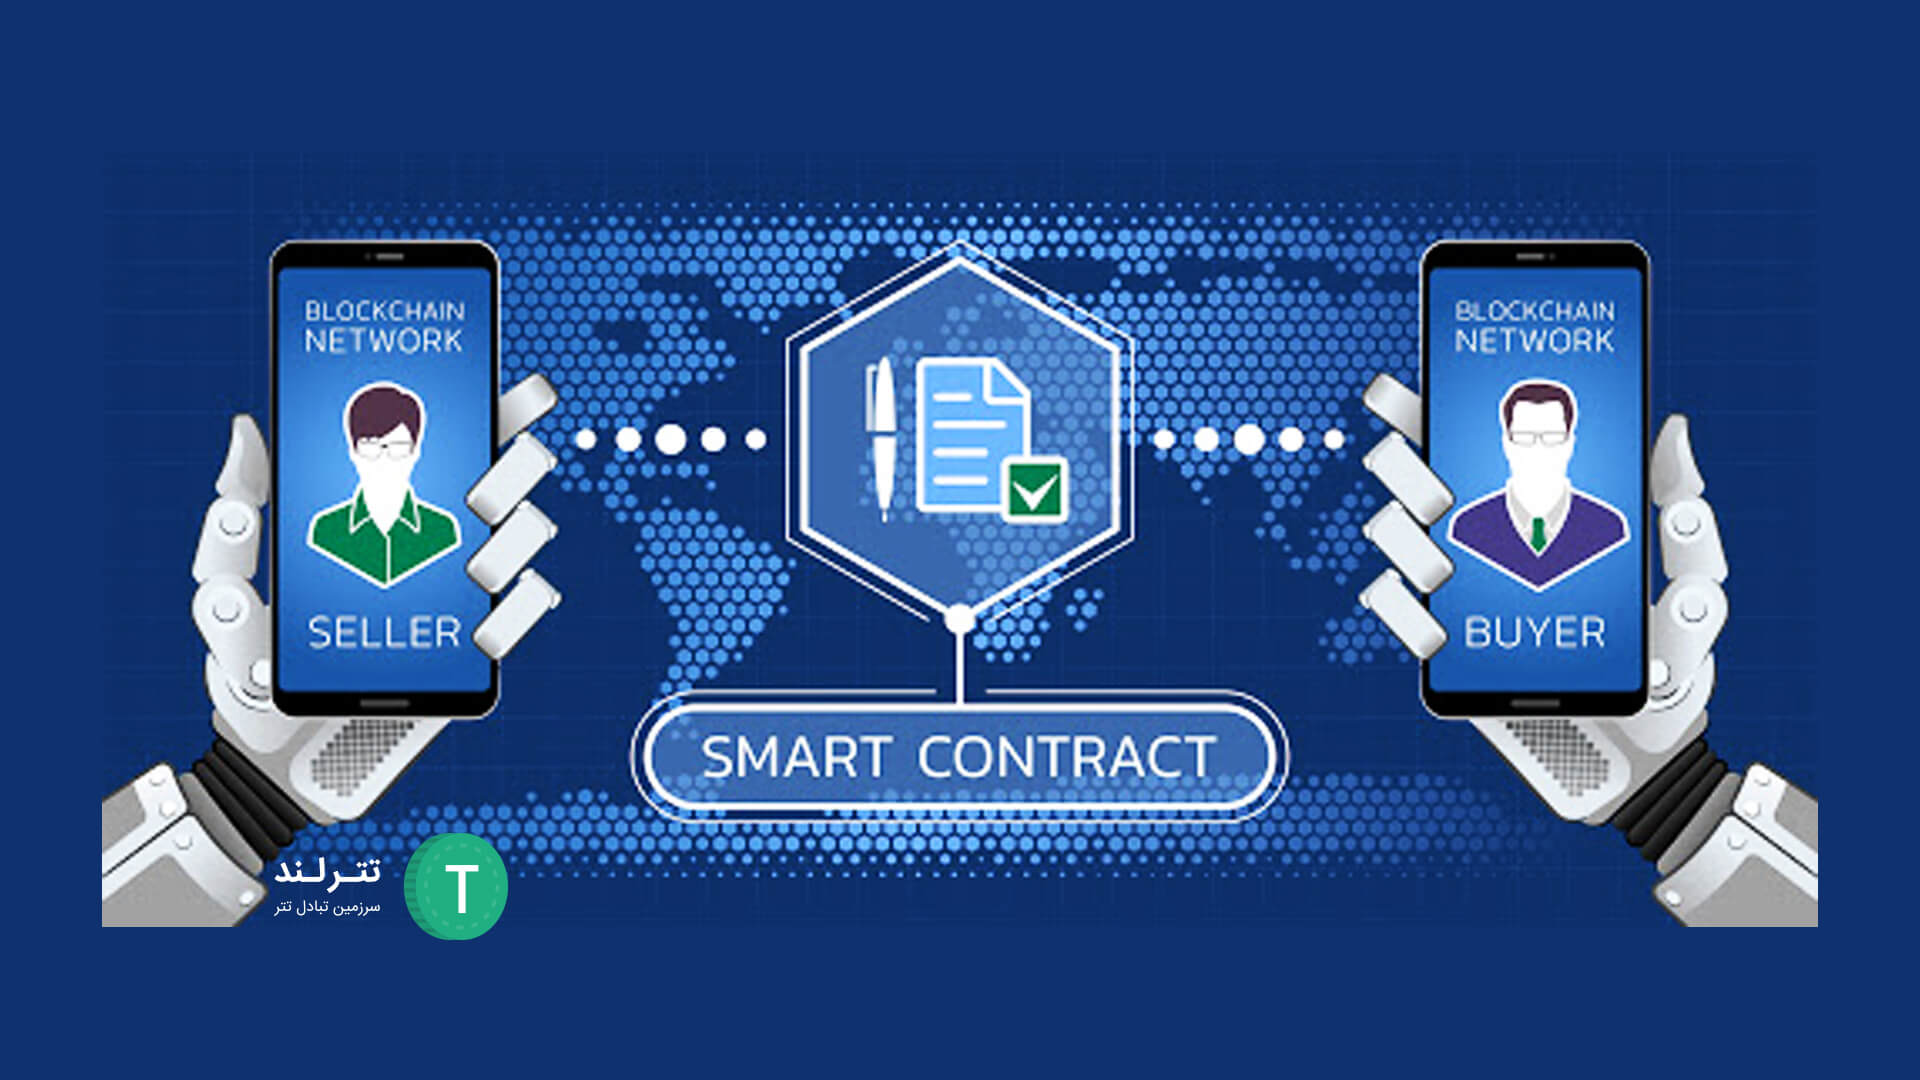 F05 smart contracts 000407 3